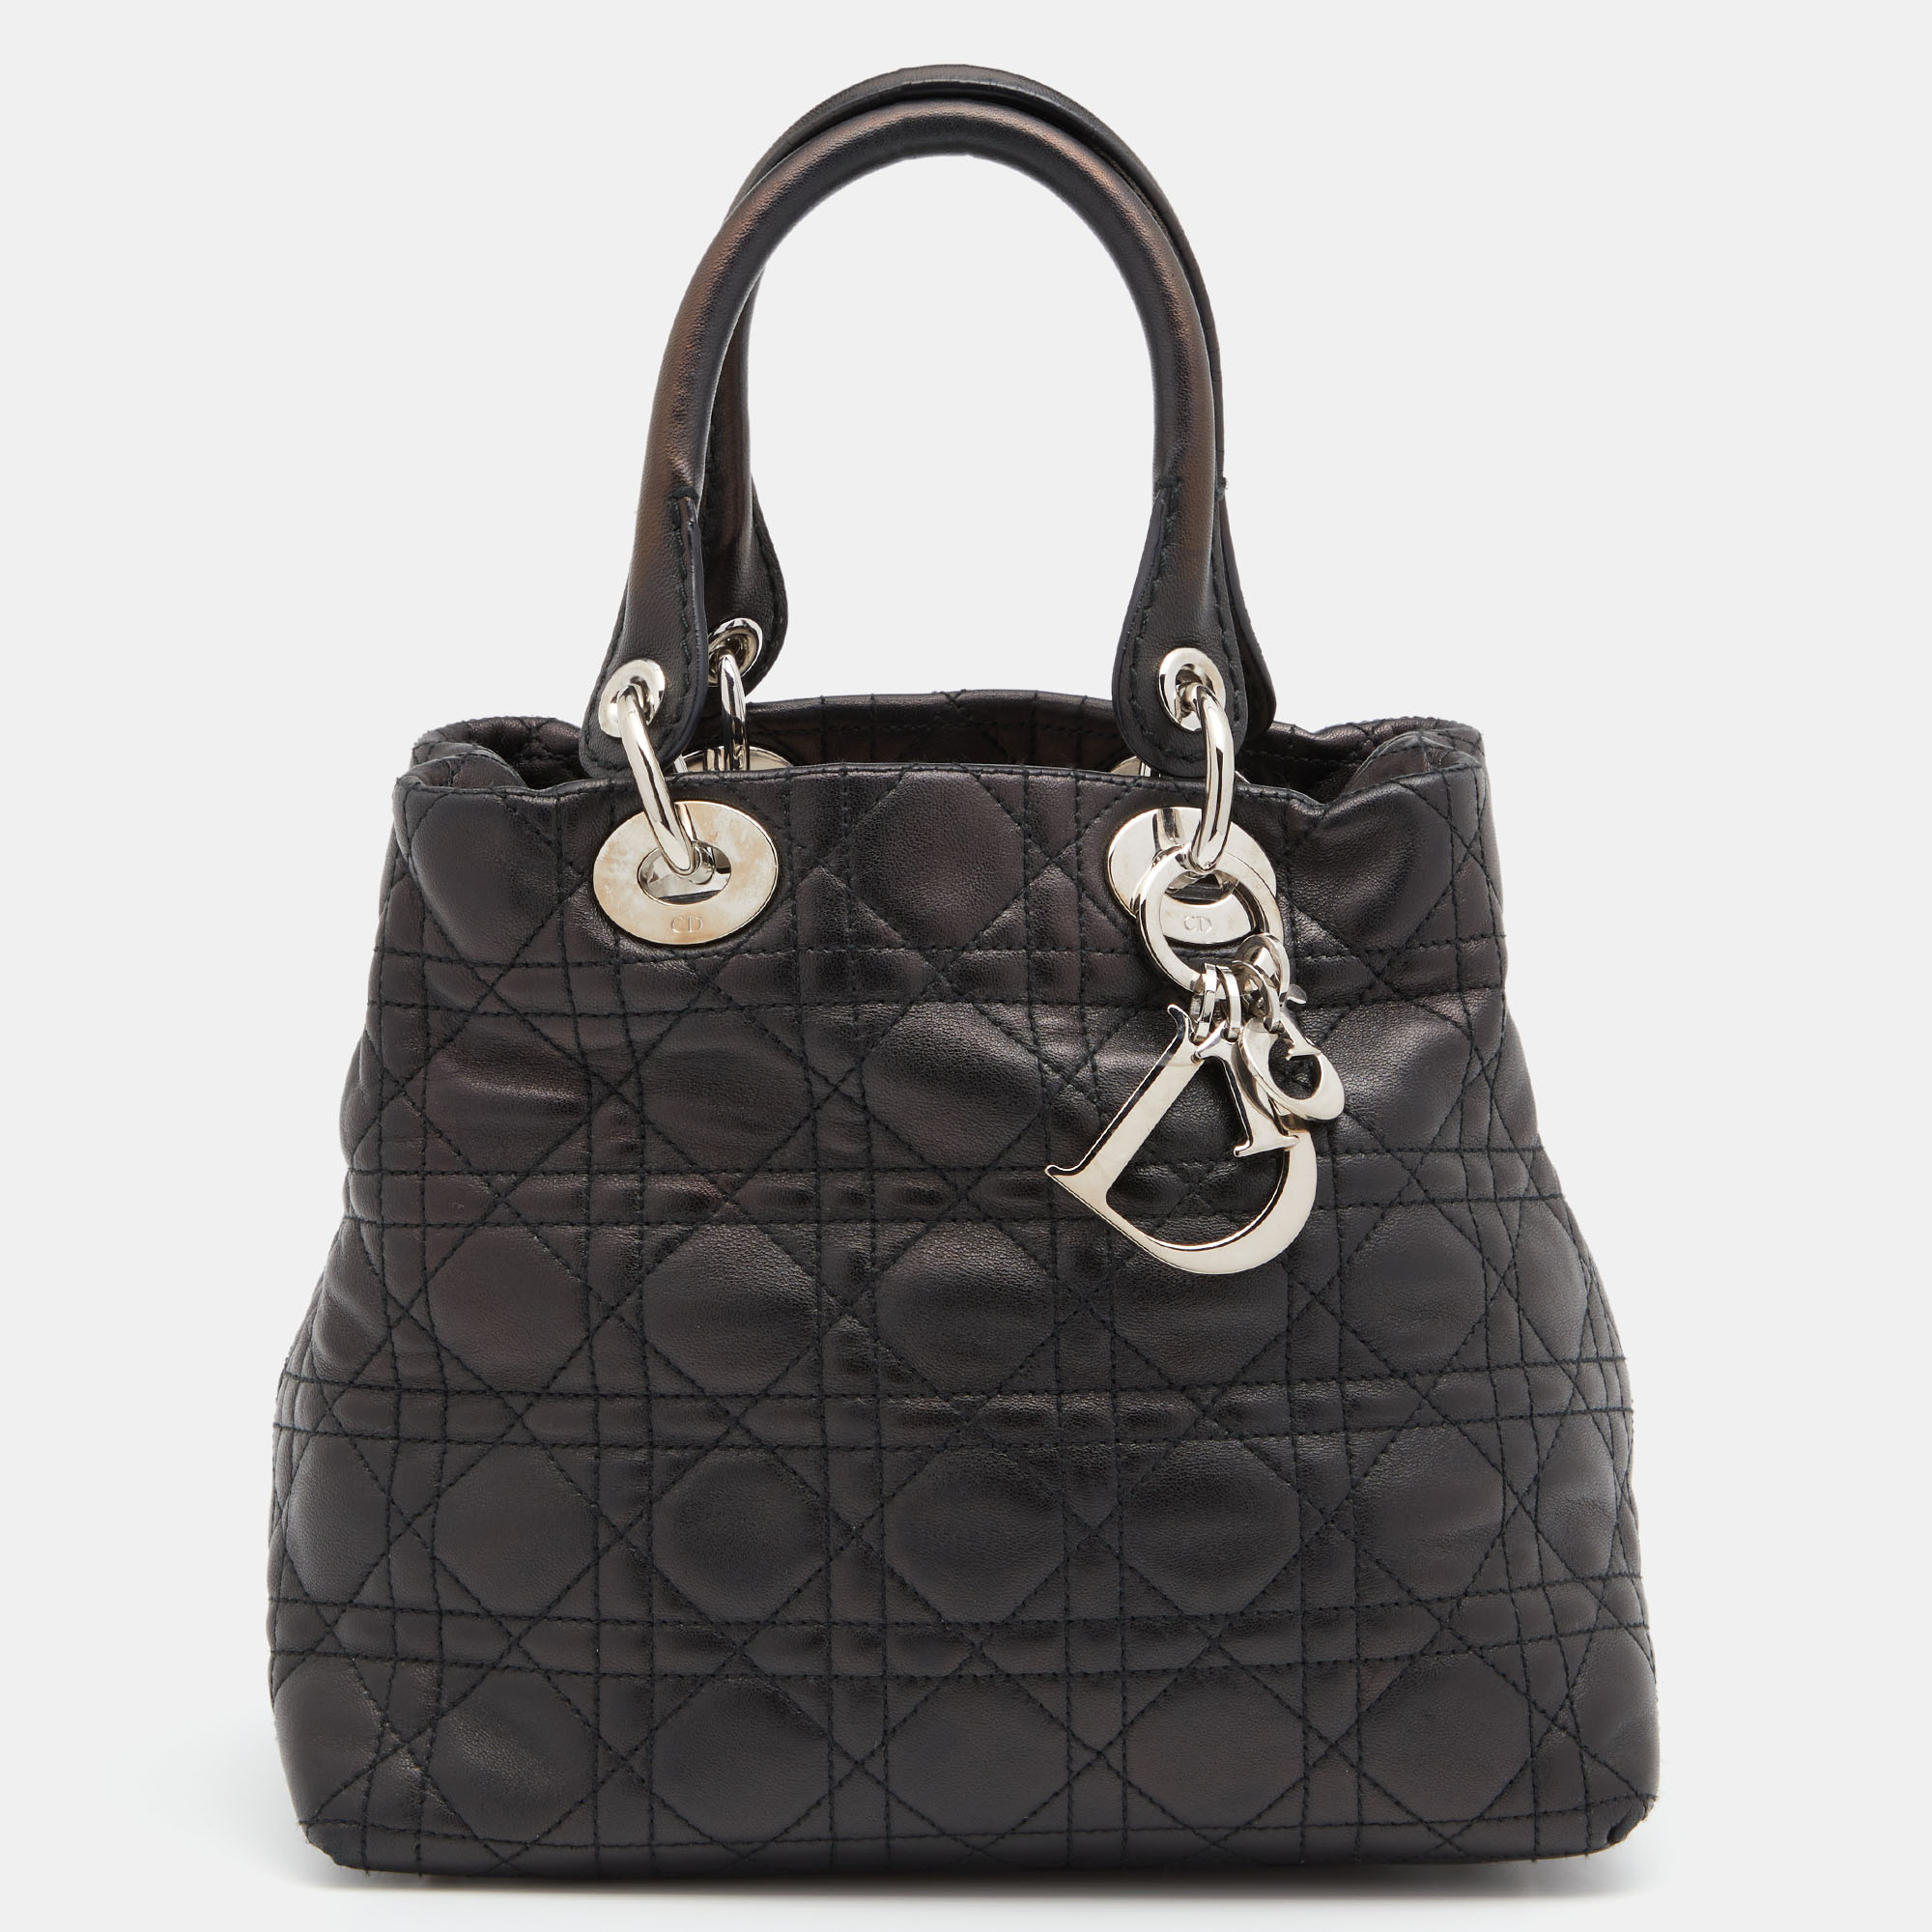 Dior Black Cannage Leather Soft Lady Dior Tote